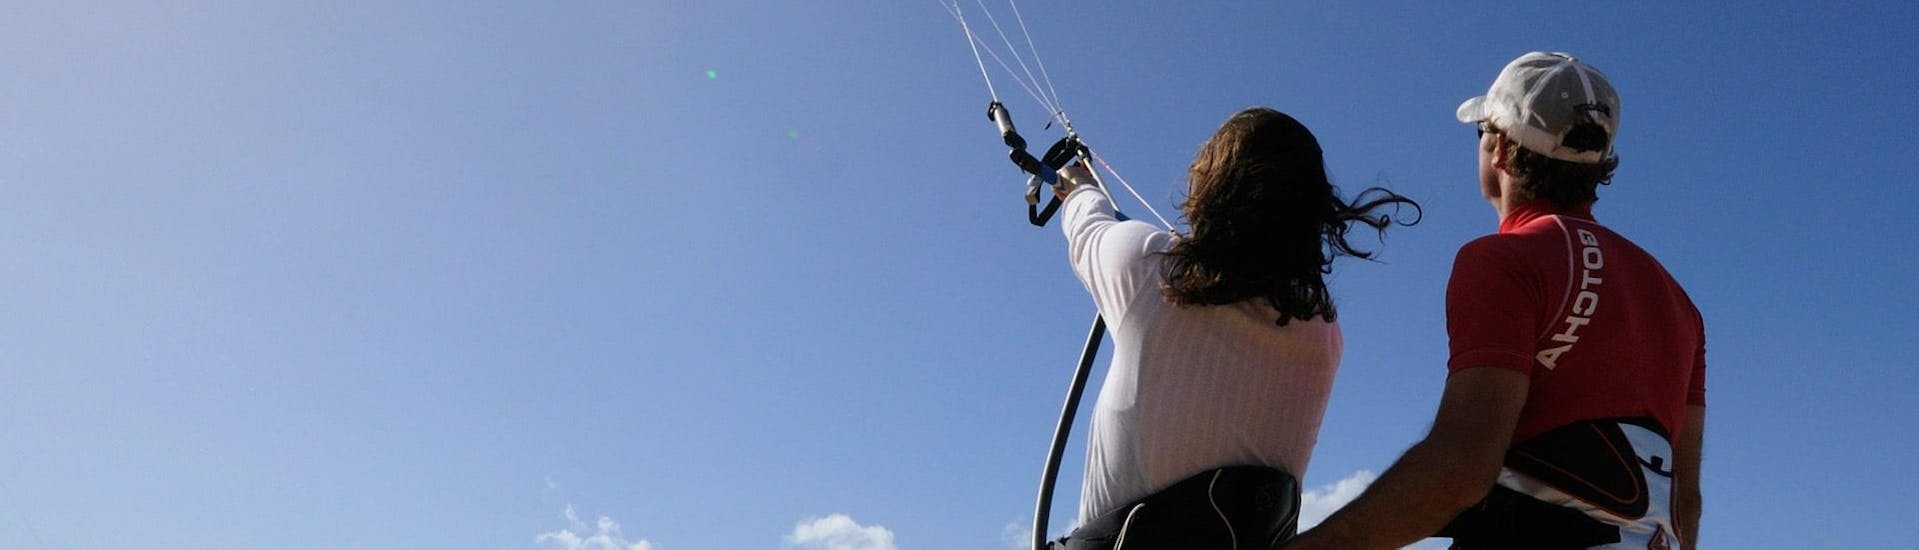 Kitesurfing Course from 12 Years - Beginners .